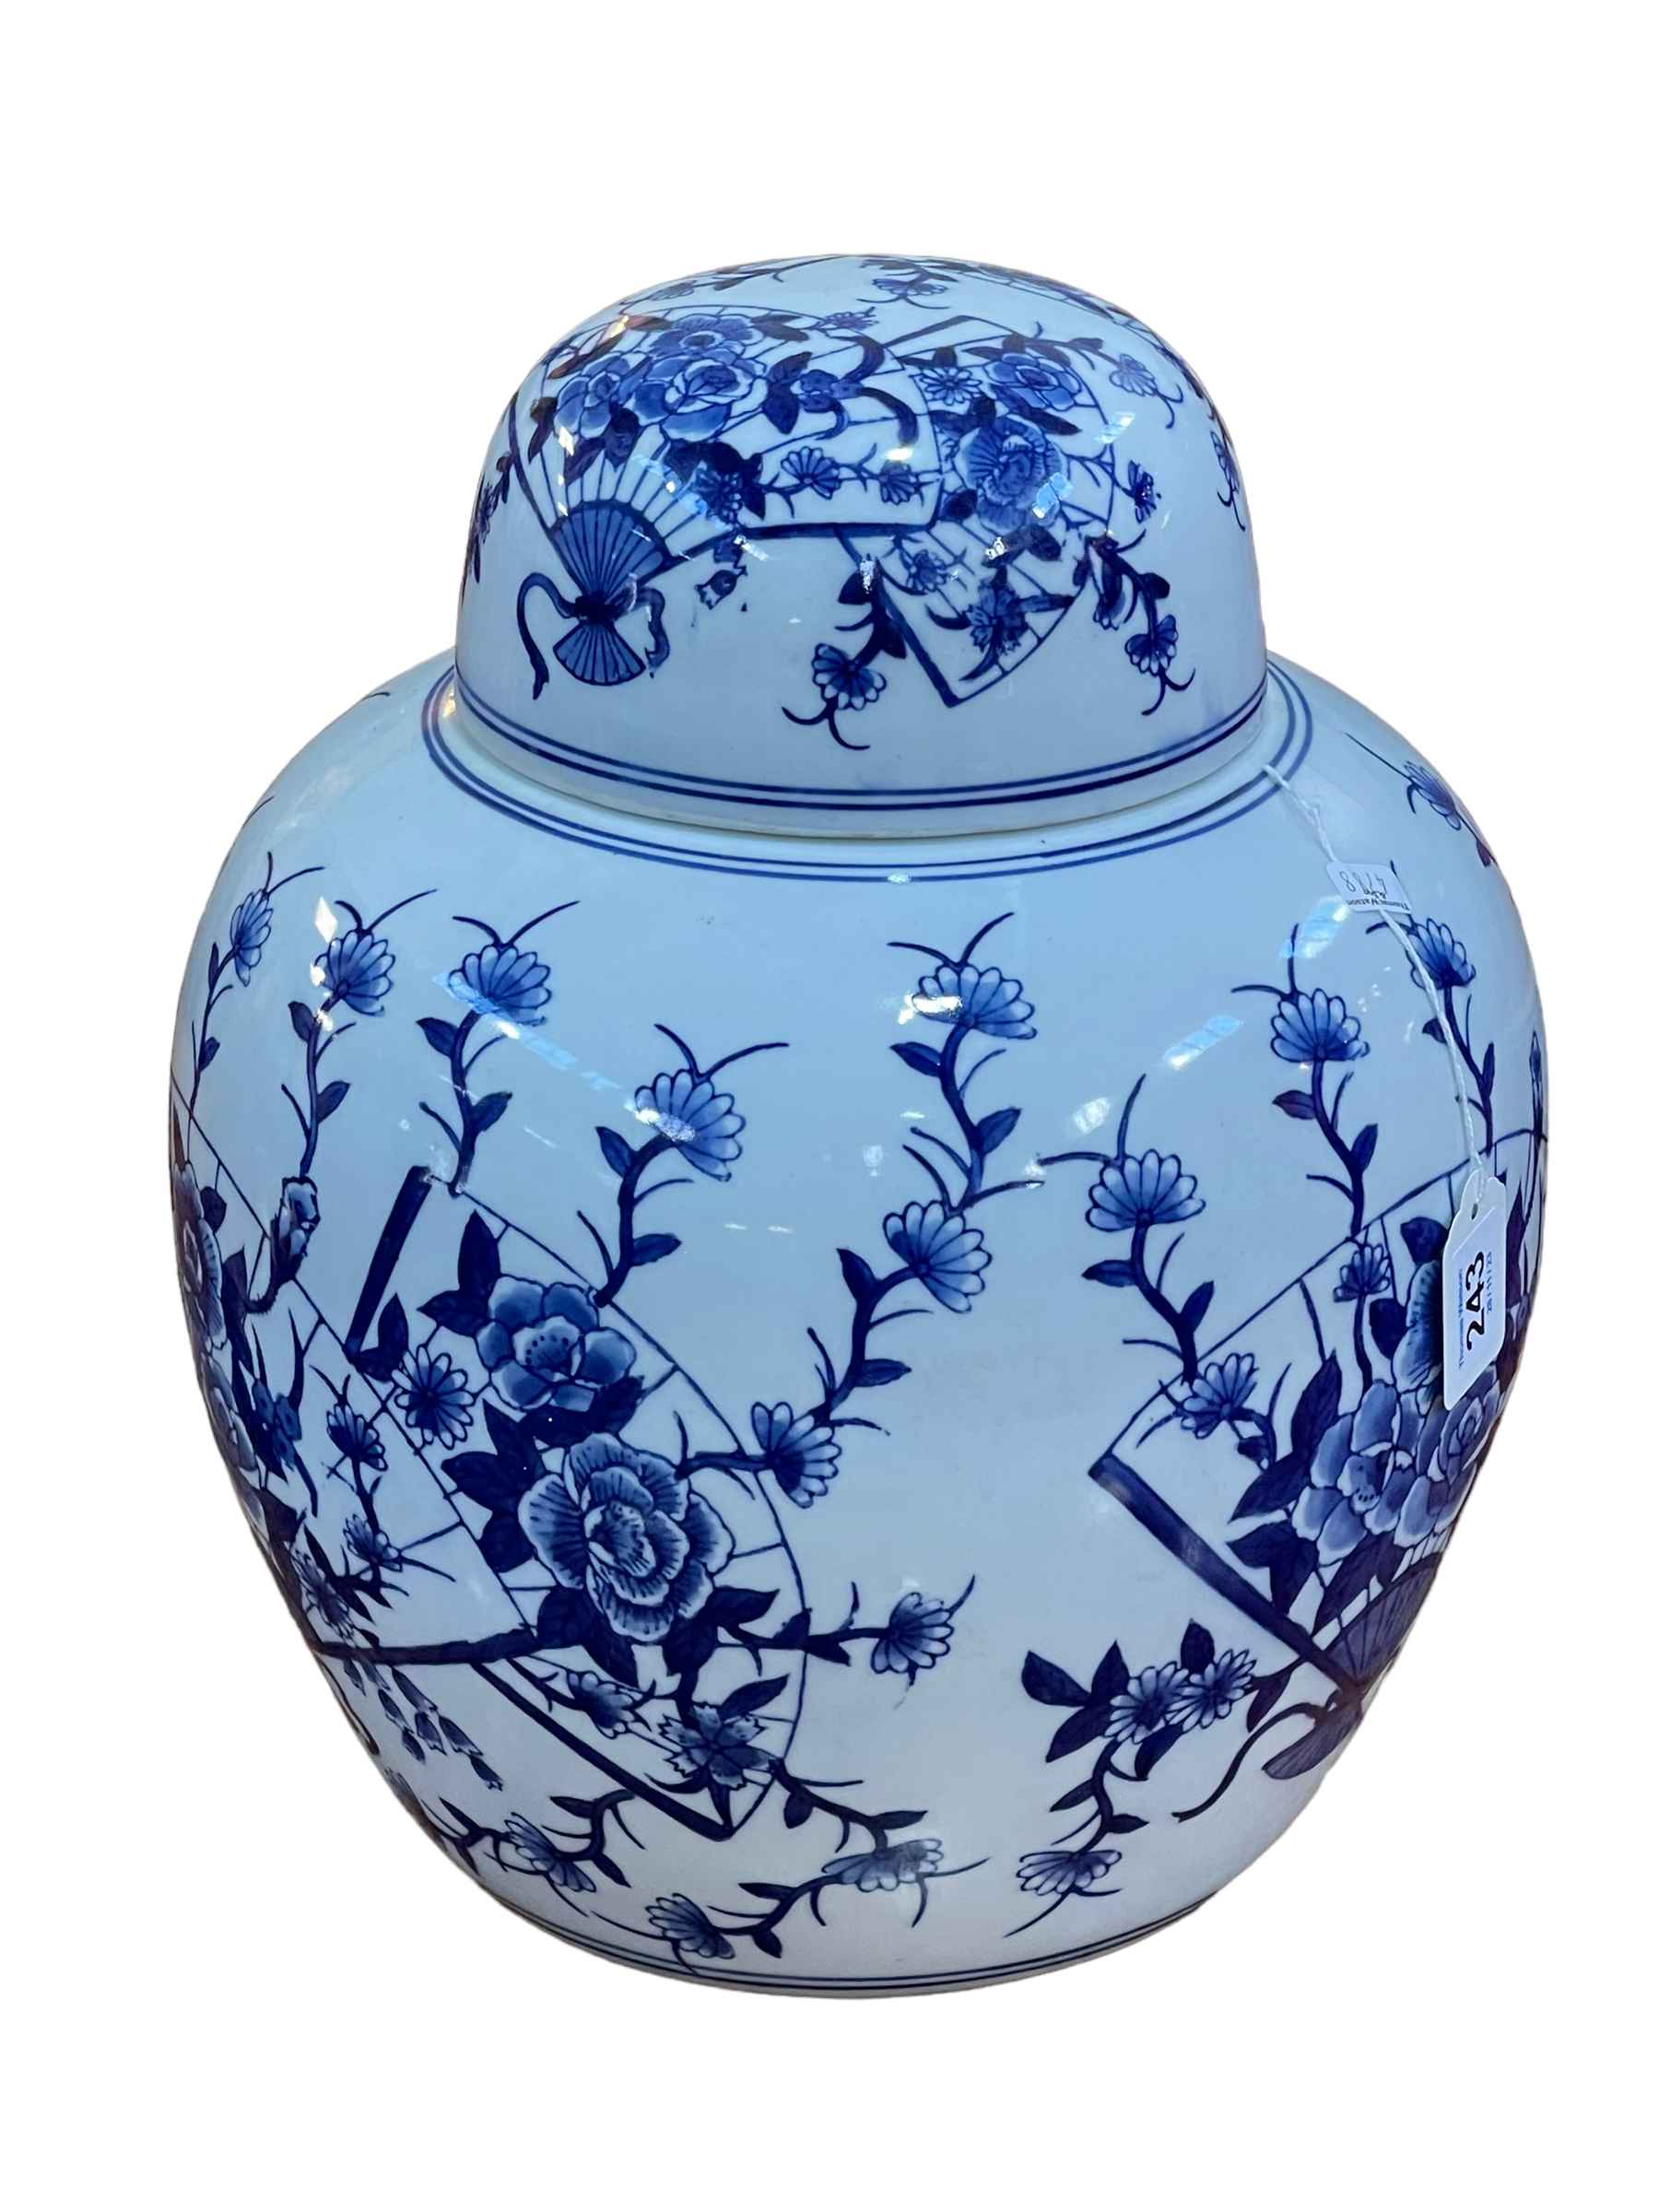 Large Chinese ginger jar with blue and white floral decoration.